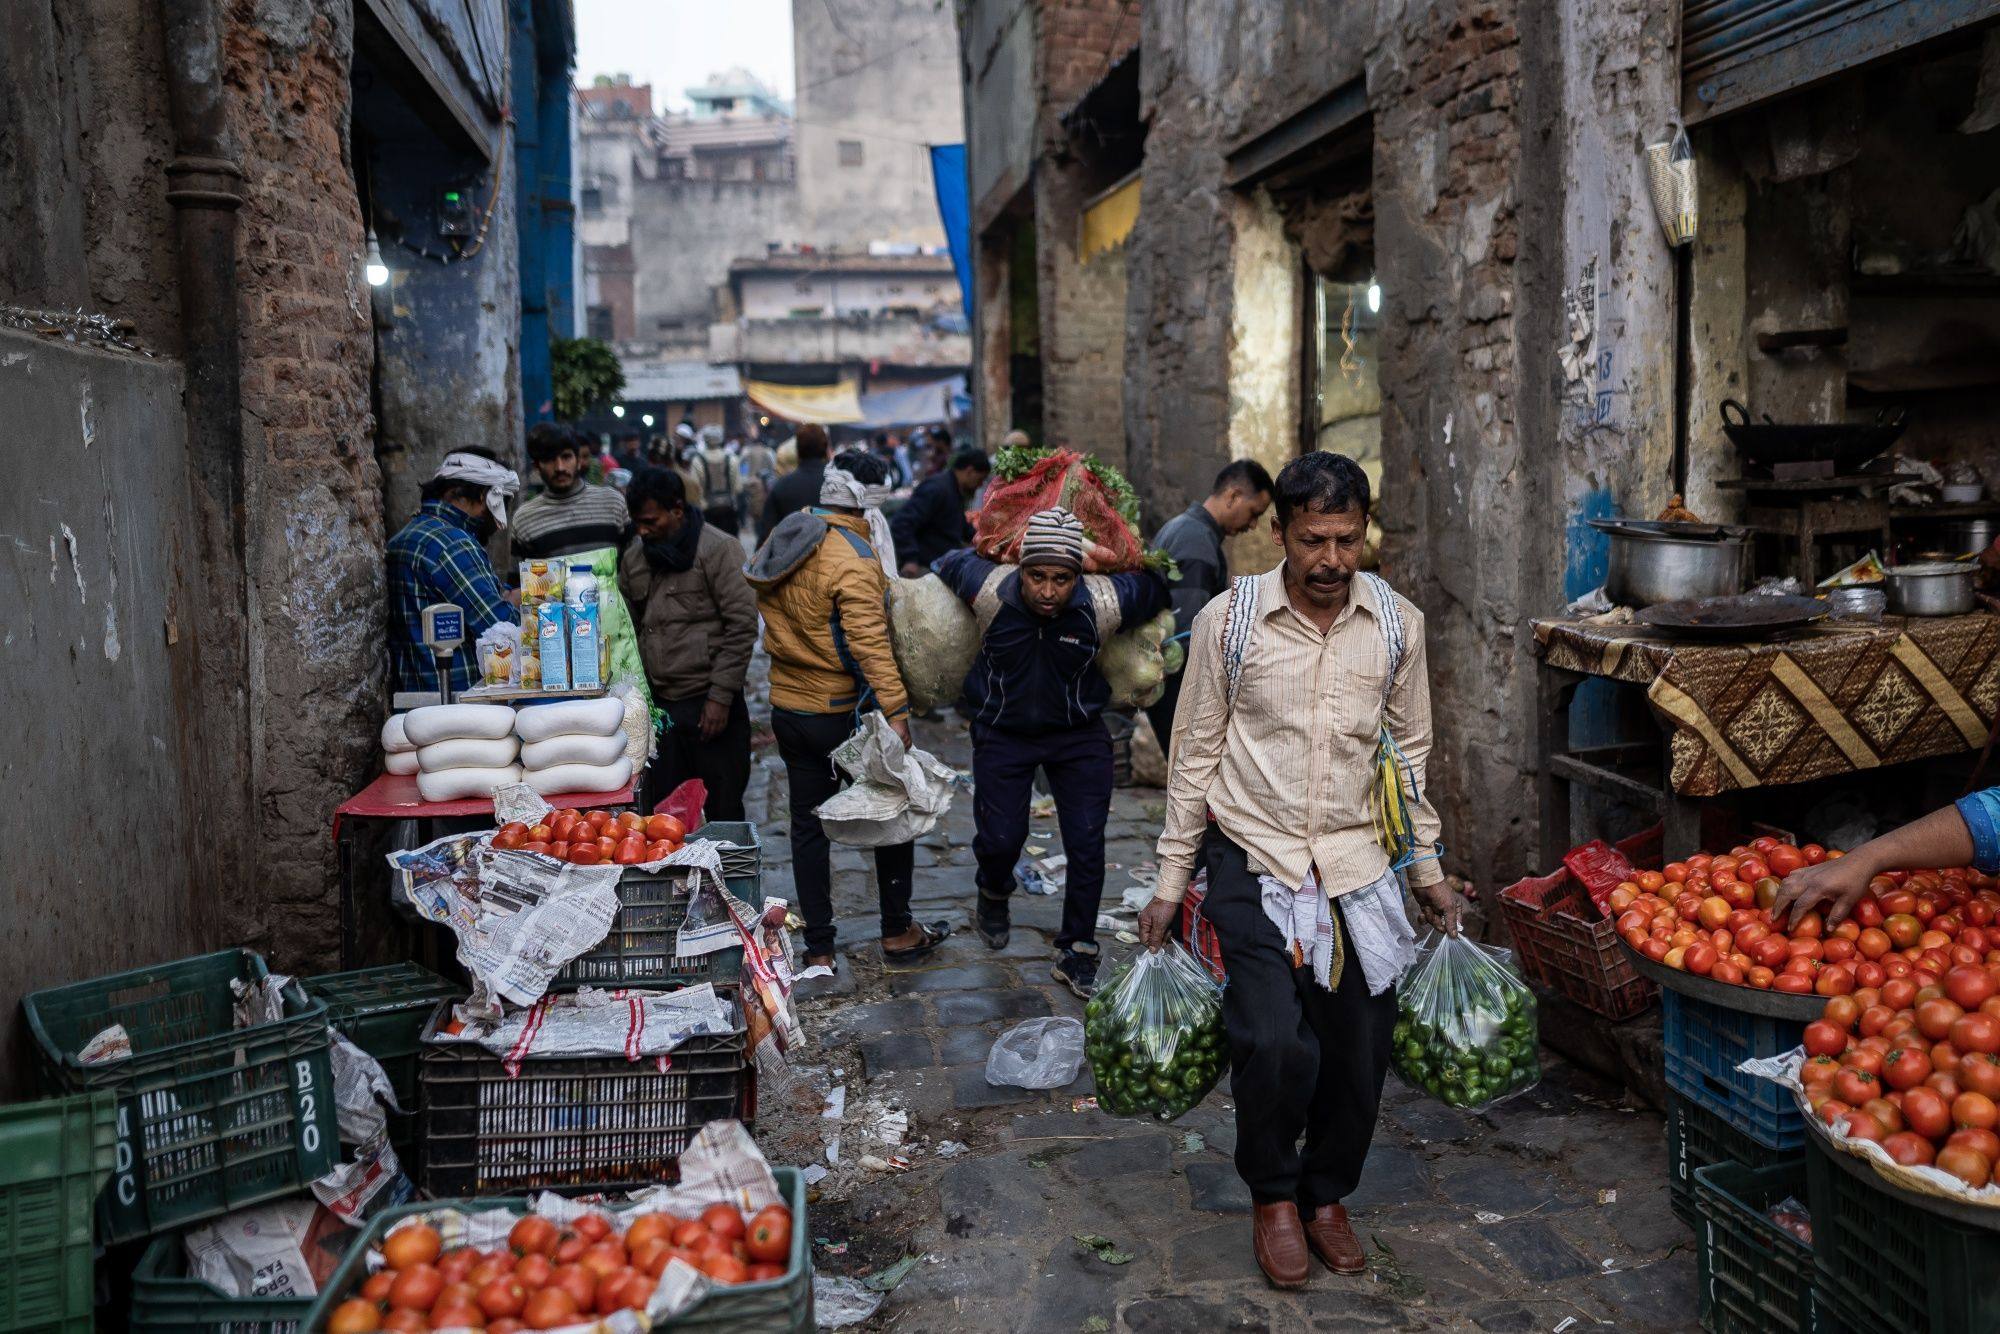 Workers carry sacks and bags of vegetables from a market in New Delhi, India, on February 26. The hype about an “Indian century” is masking a problem that has grown in the 75 years since independence: anaemic job creation. Photo: Bloomberg